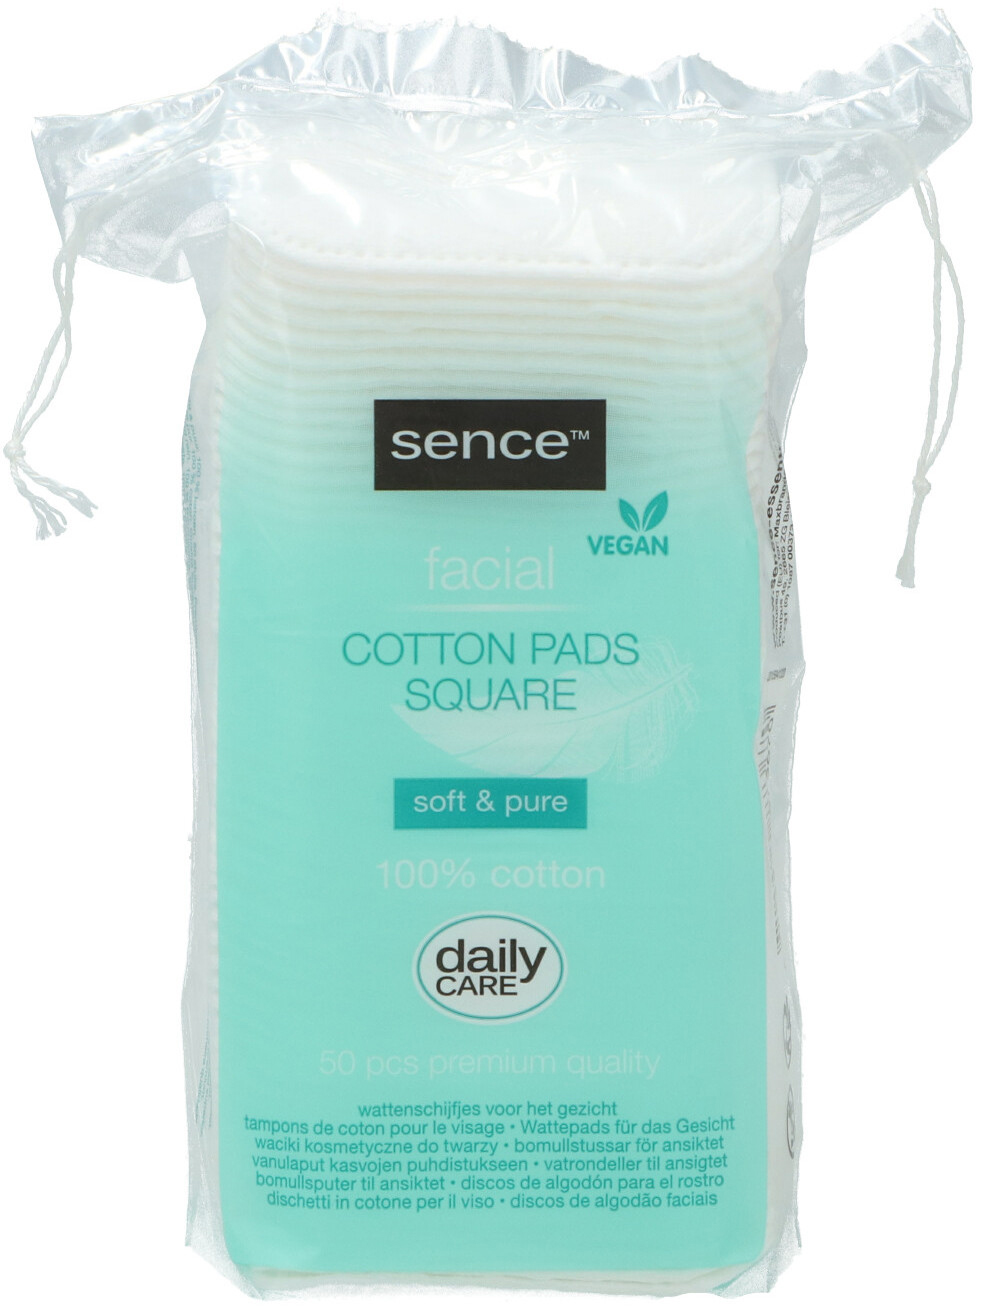 00630 - cotton pads pack of 50